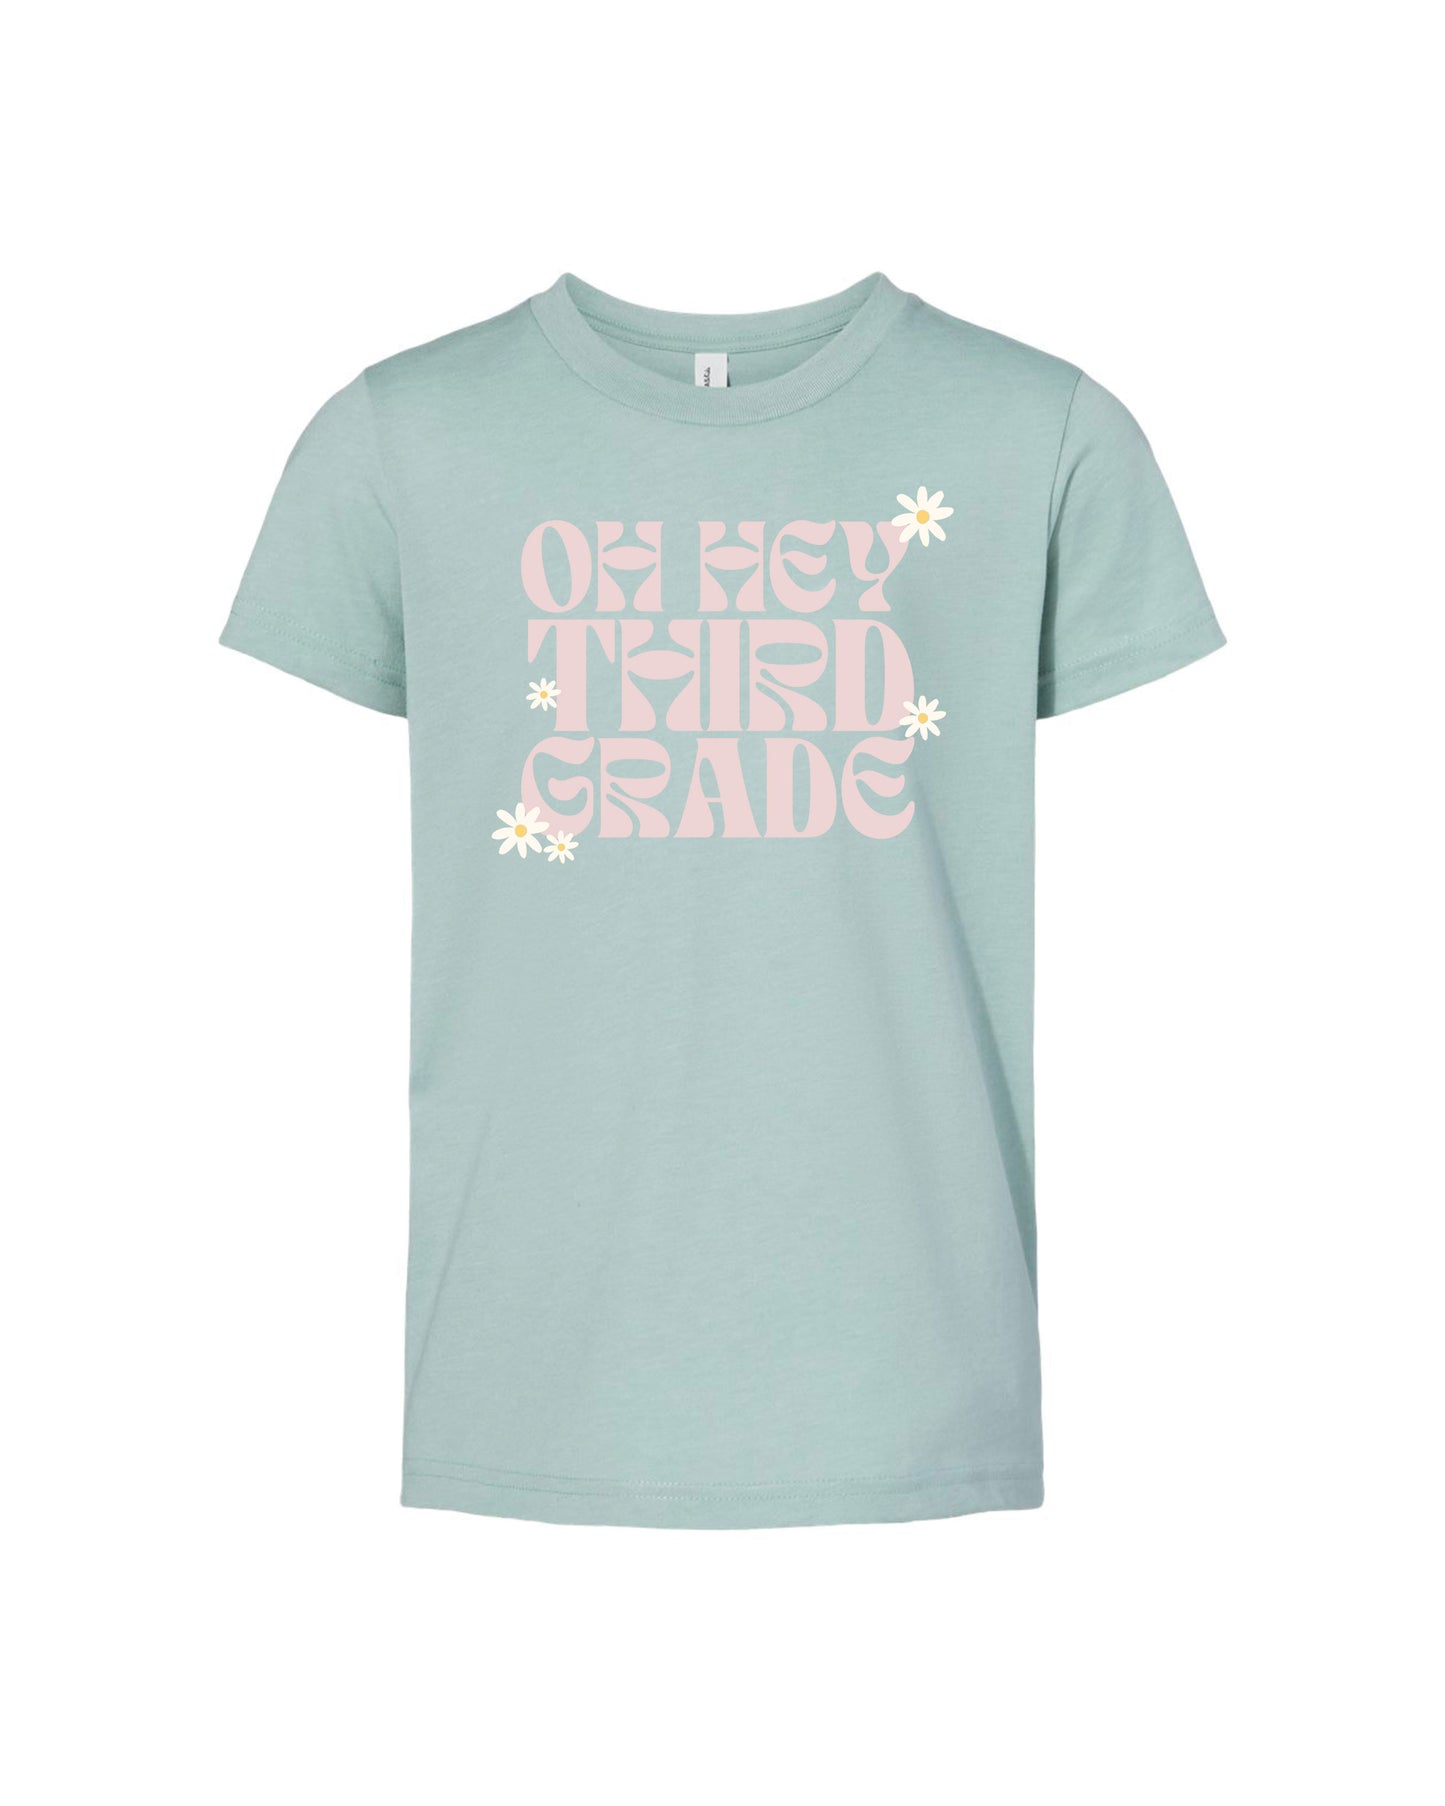 Oh Hey Grade | Tee | Kids-Sister Shirts-Sister Shirts, Cute & Custom Tees for Mama & Littles in Trussville, Alabama.